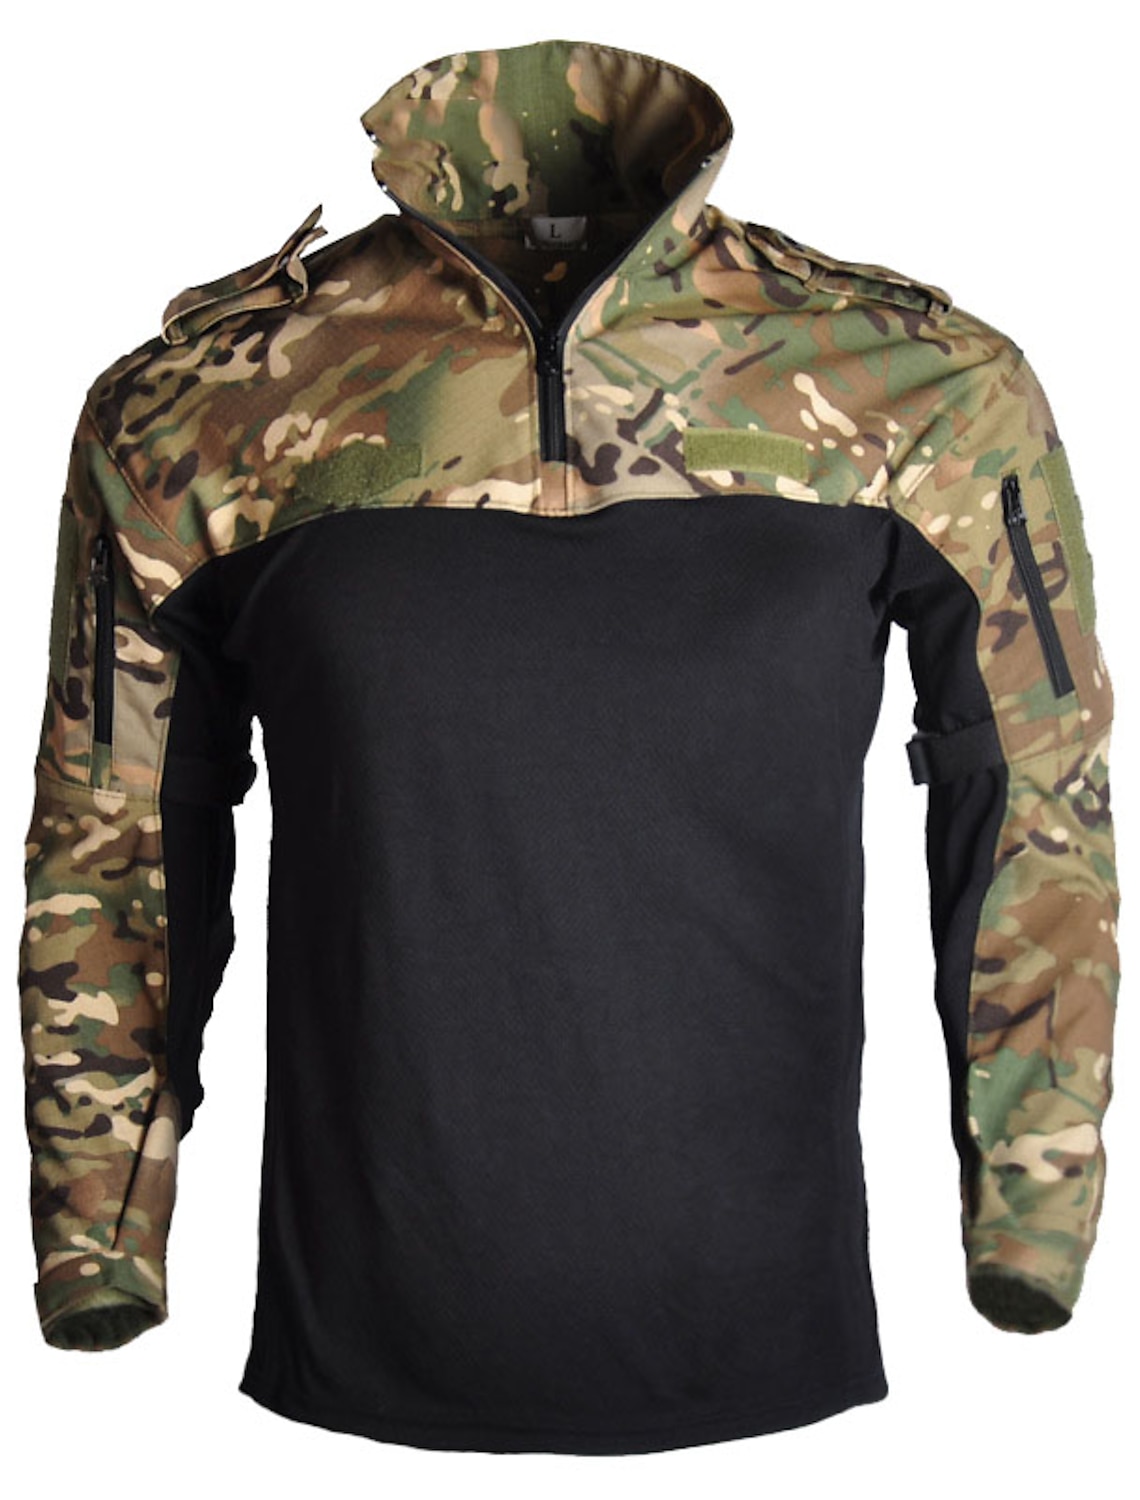 Tactical Jacket Night Camouflage Combat Shirt Pullovers Hooded Hoodie For Men 